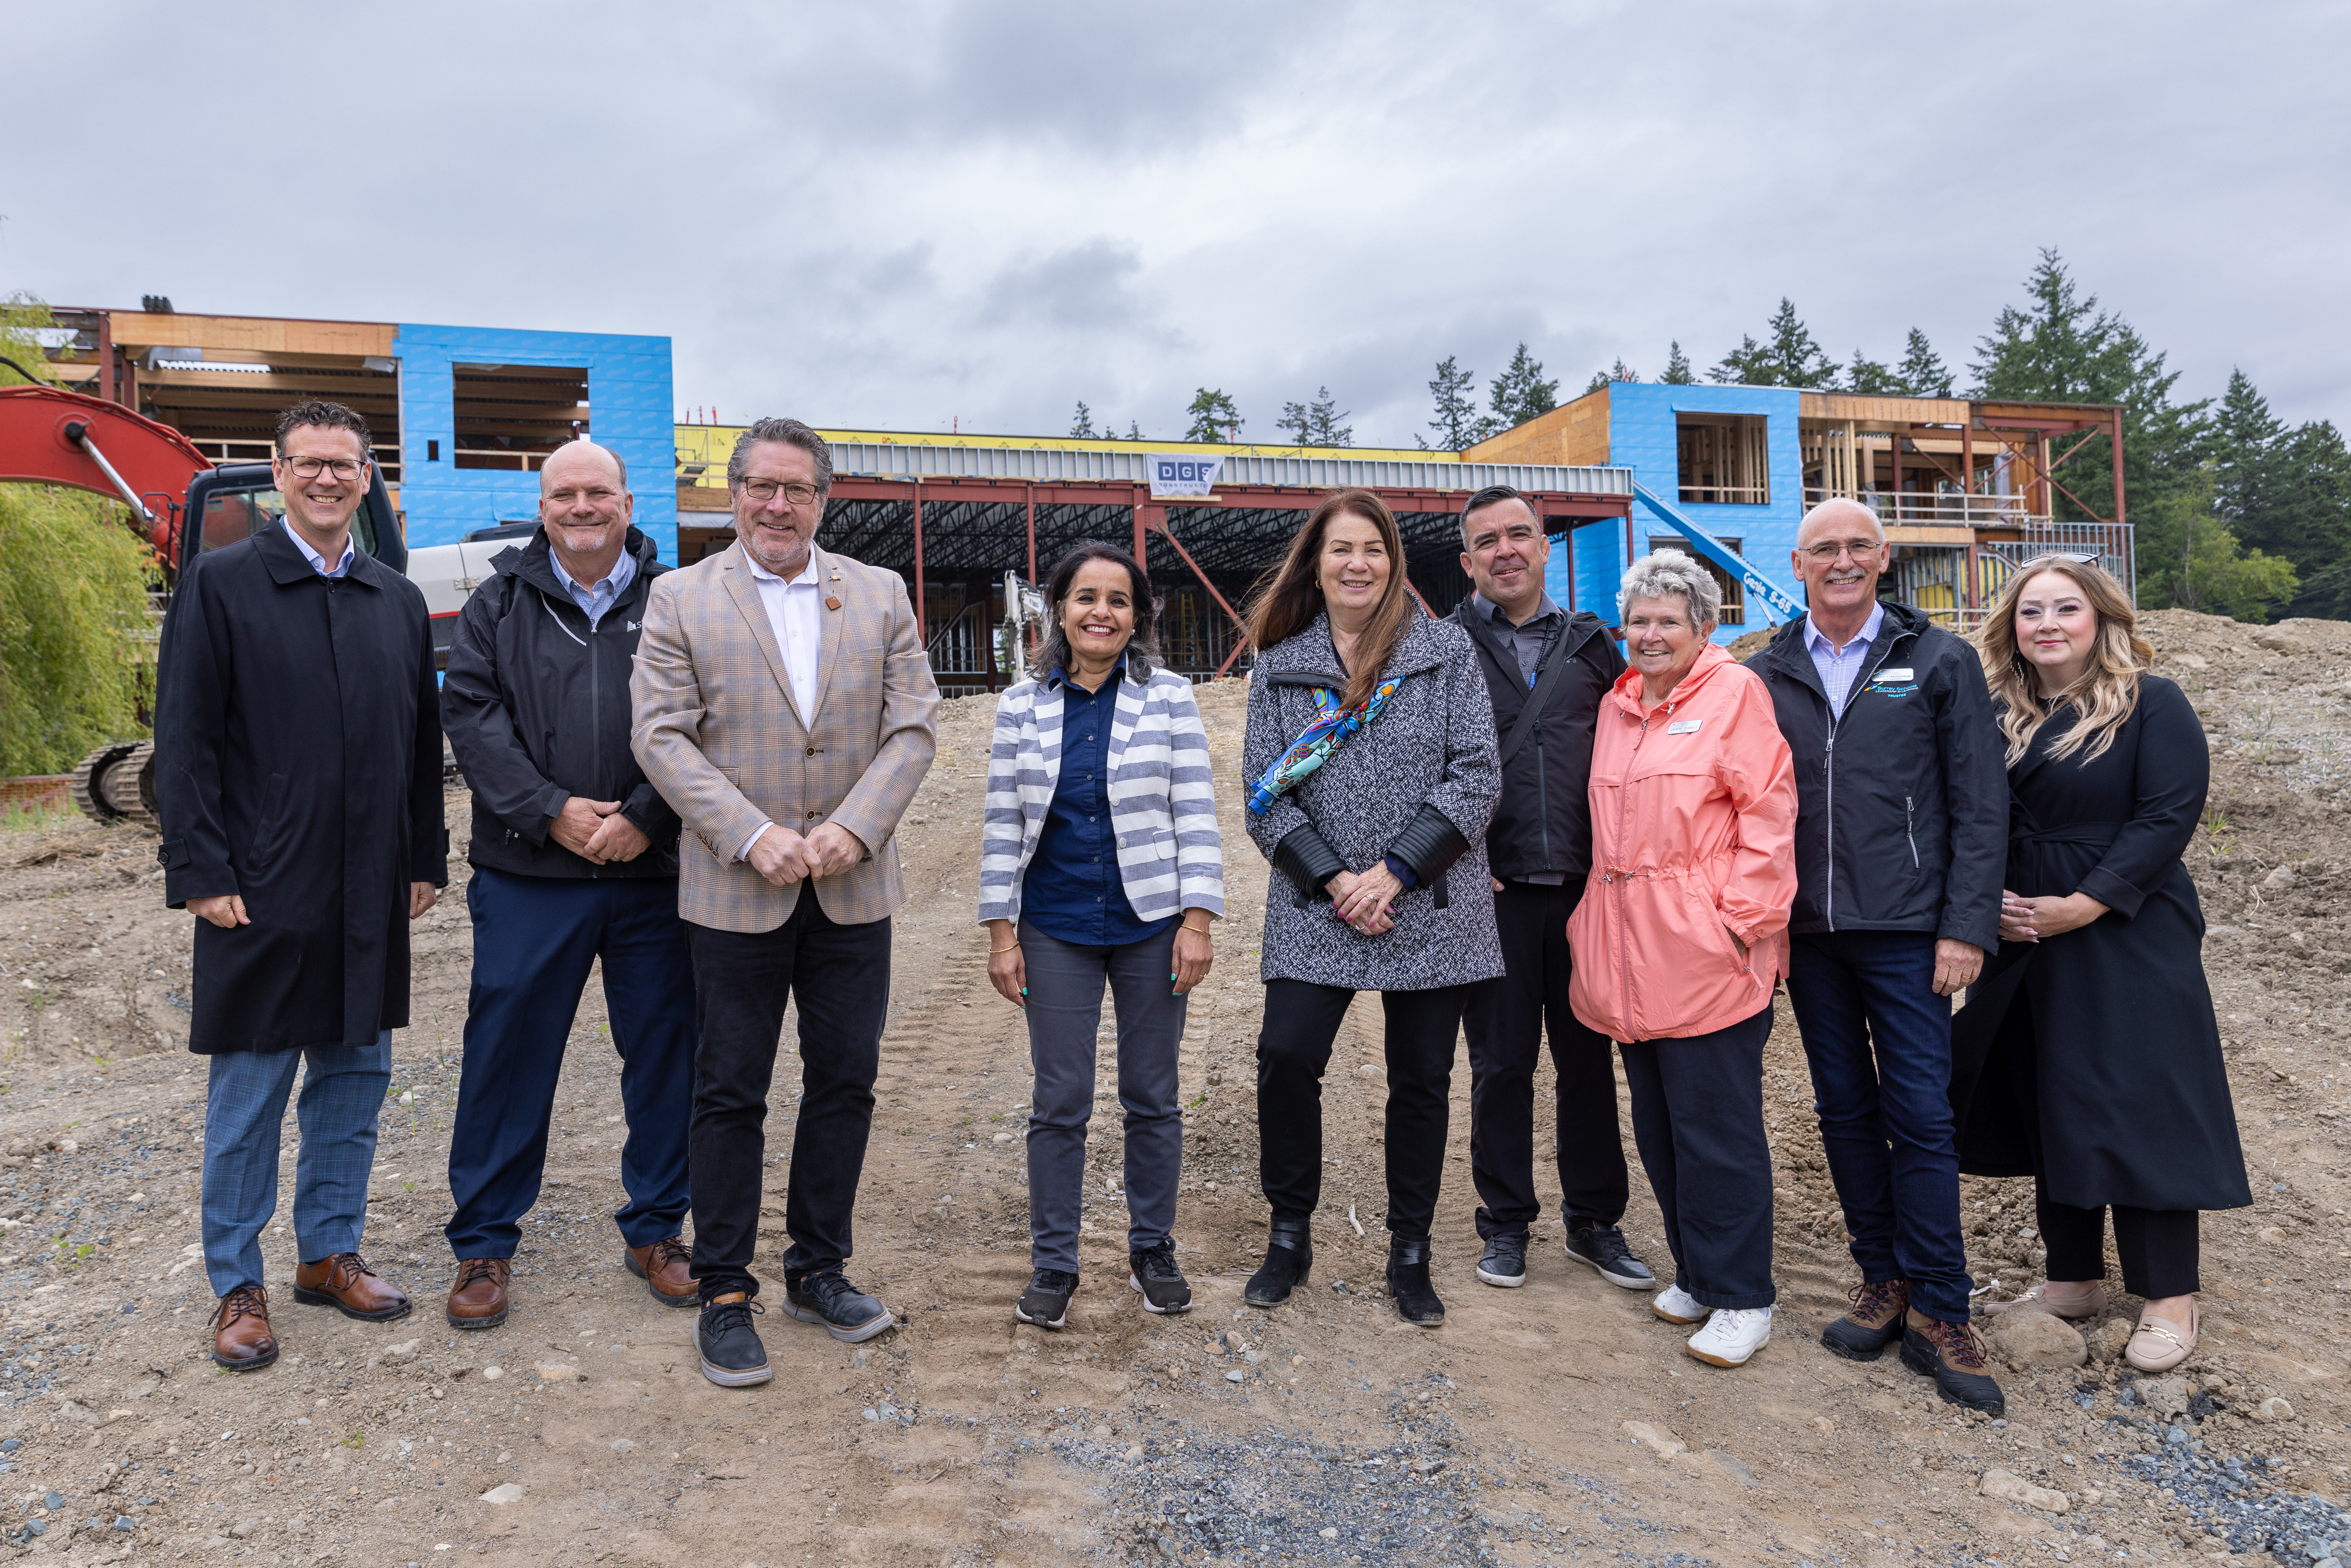 New elementary school to come up in Surrey, construction to be completed by 2025